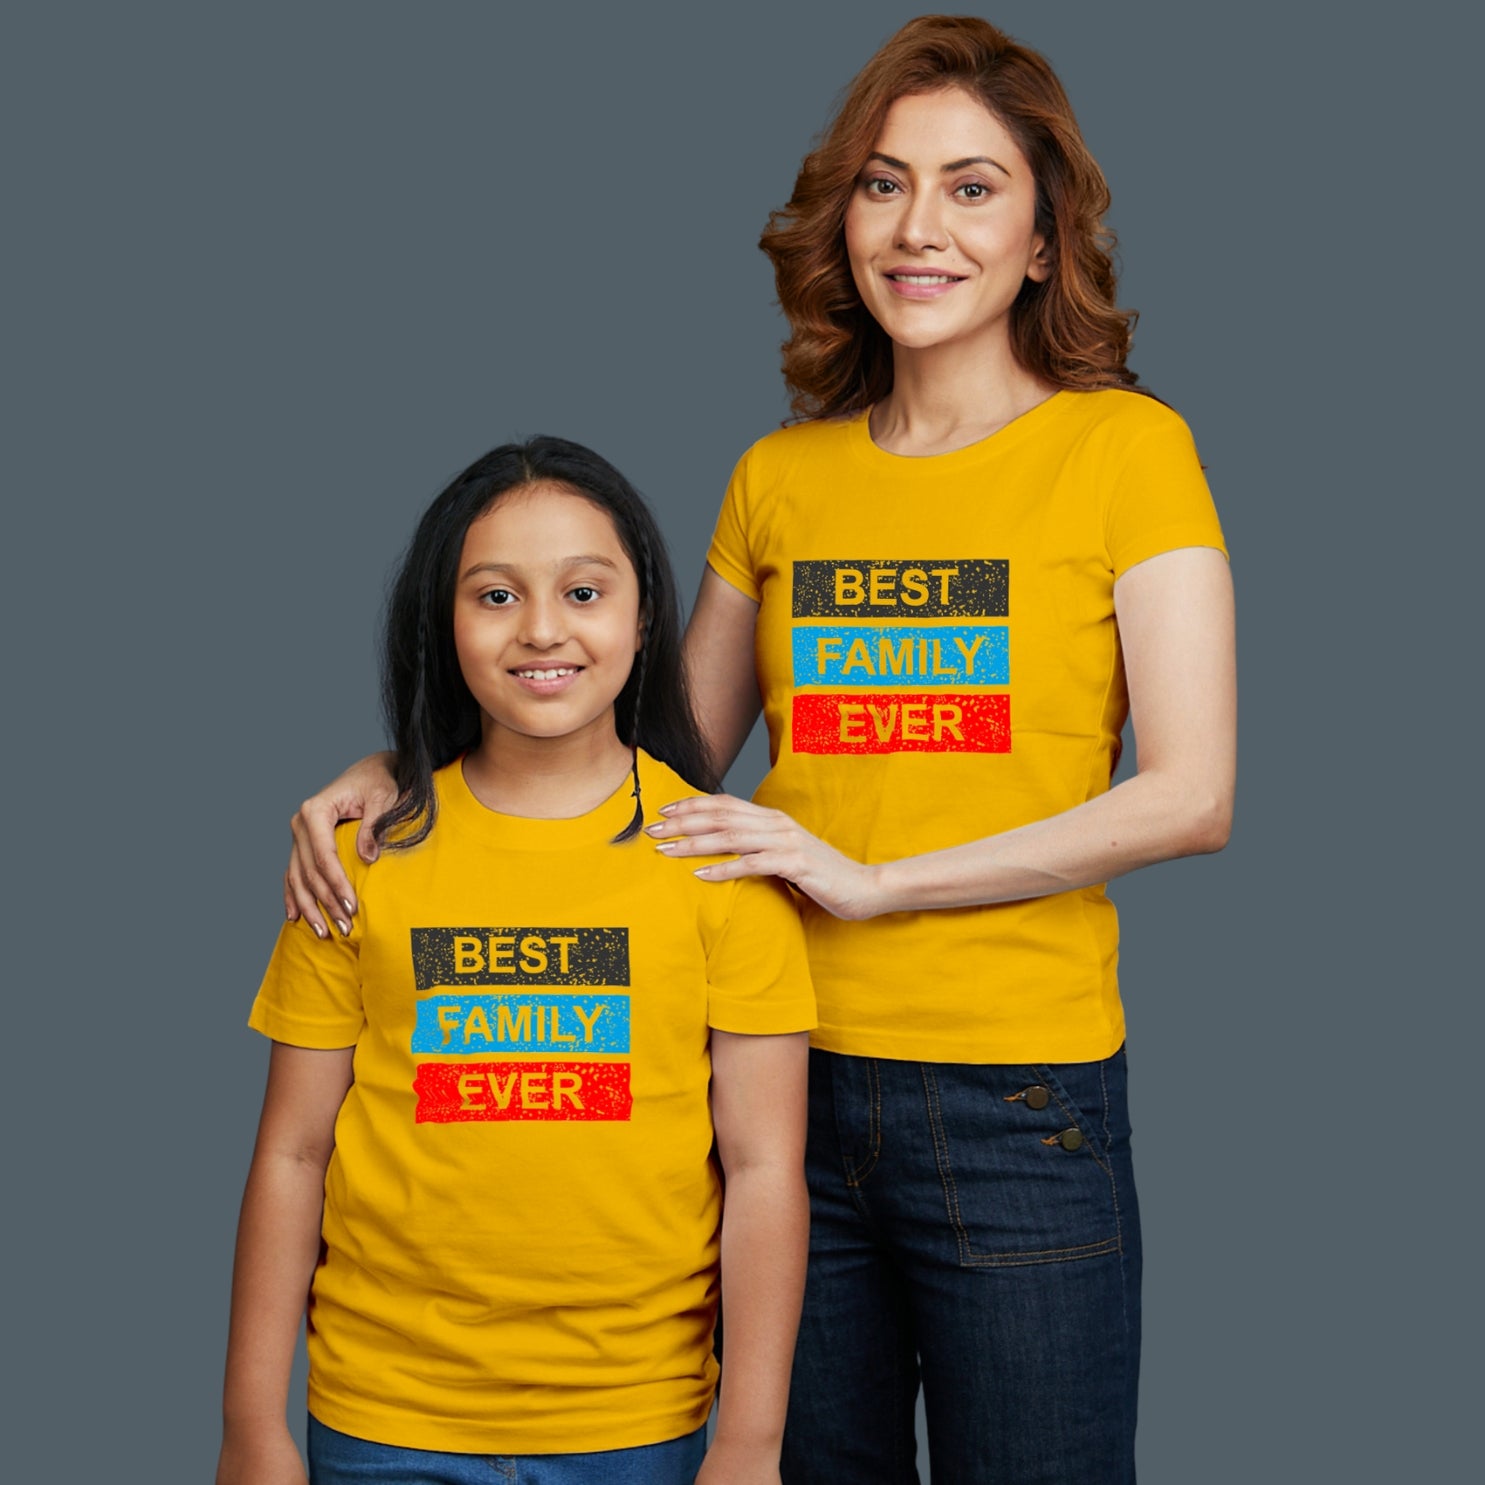 Family of 2 t shirt for Mom Daughter in Yellow Colour- Best Family Ever Variant